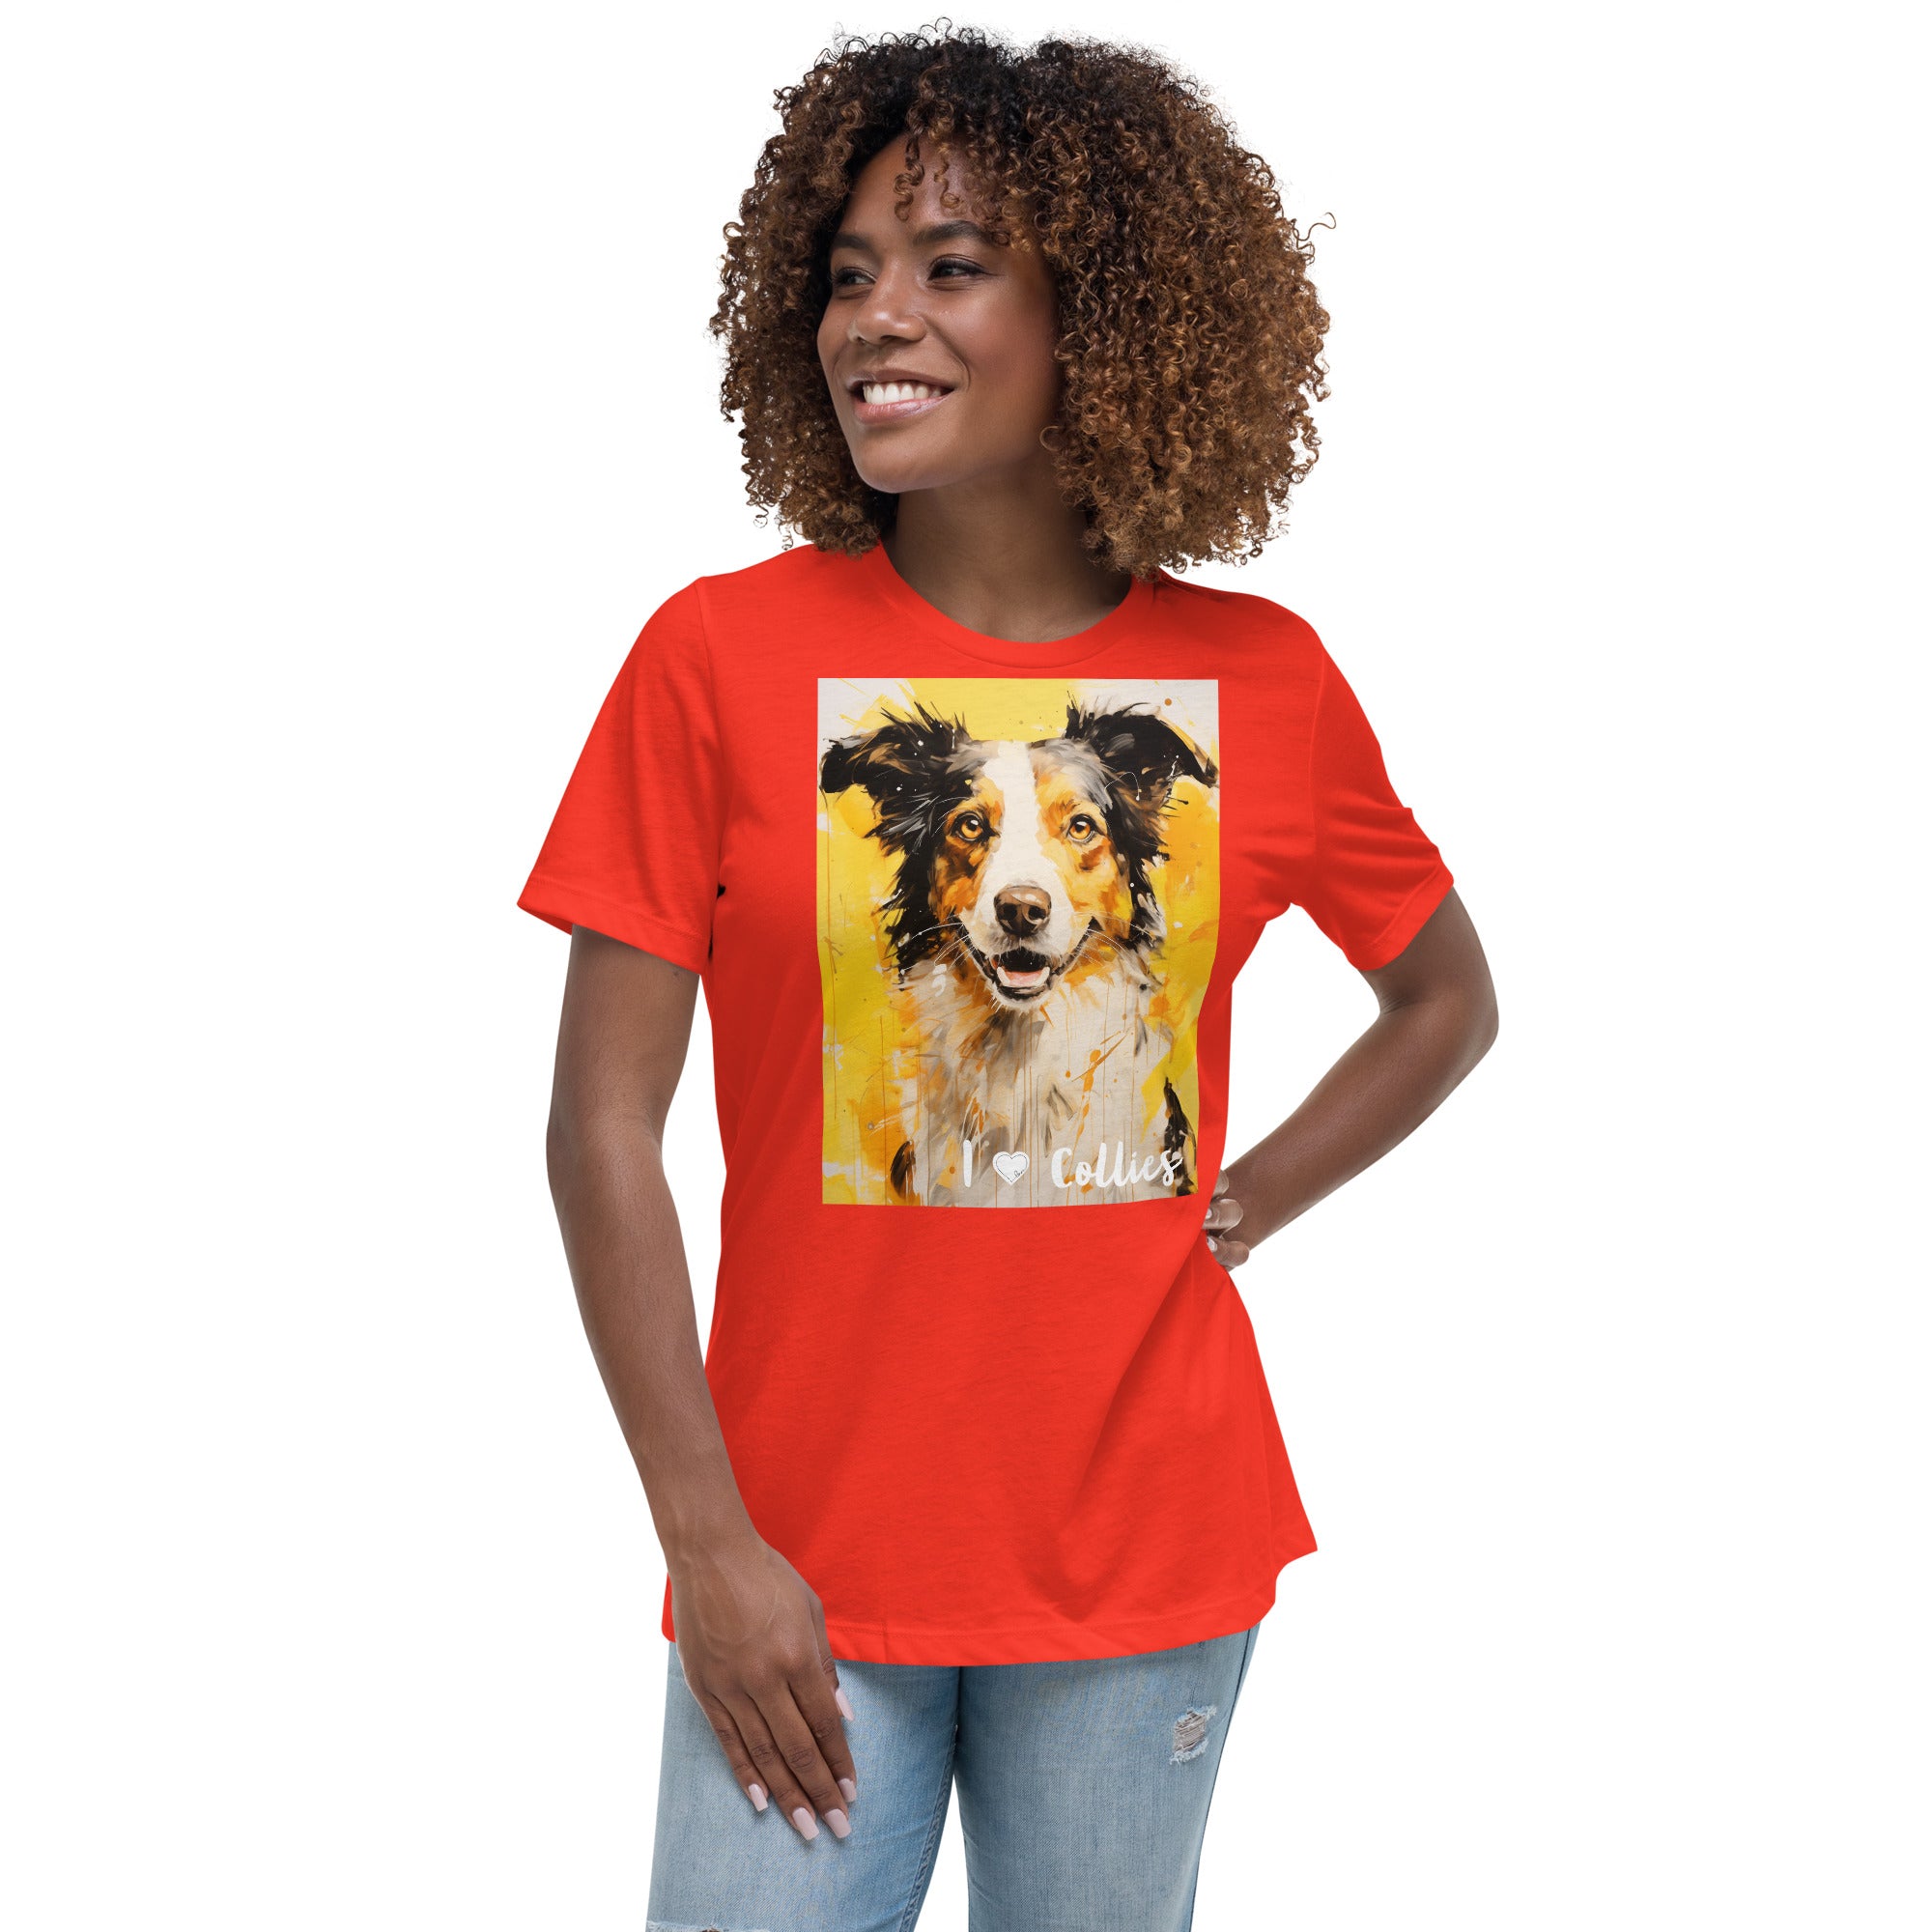 Women's Relaxed T-Shirt - I ❤ Dogs - Border Collie